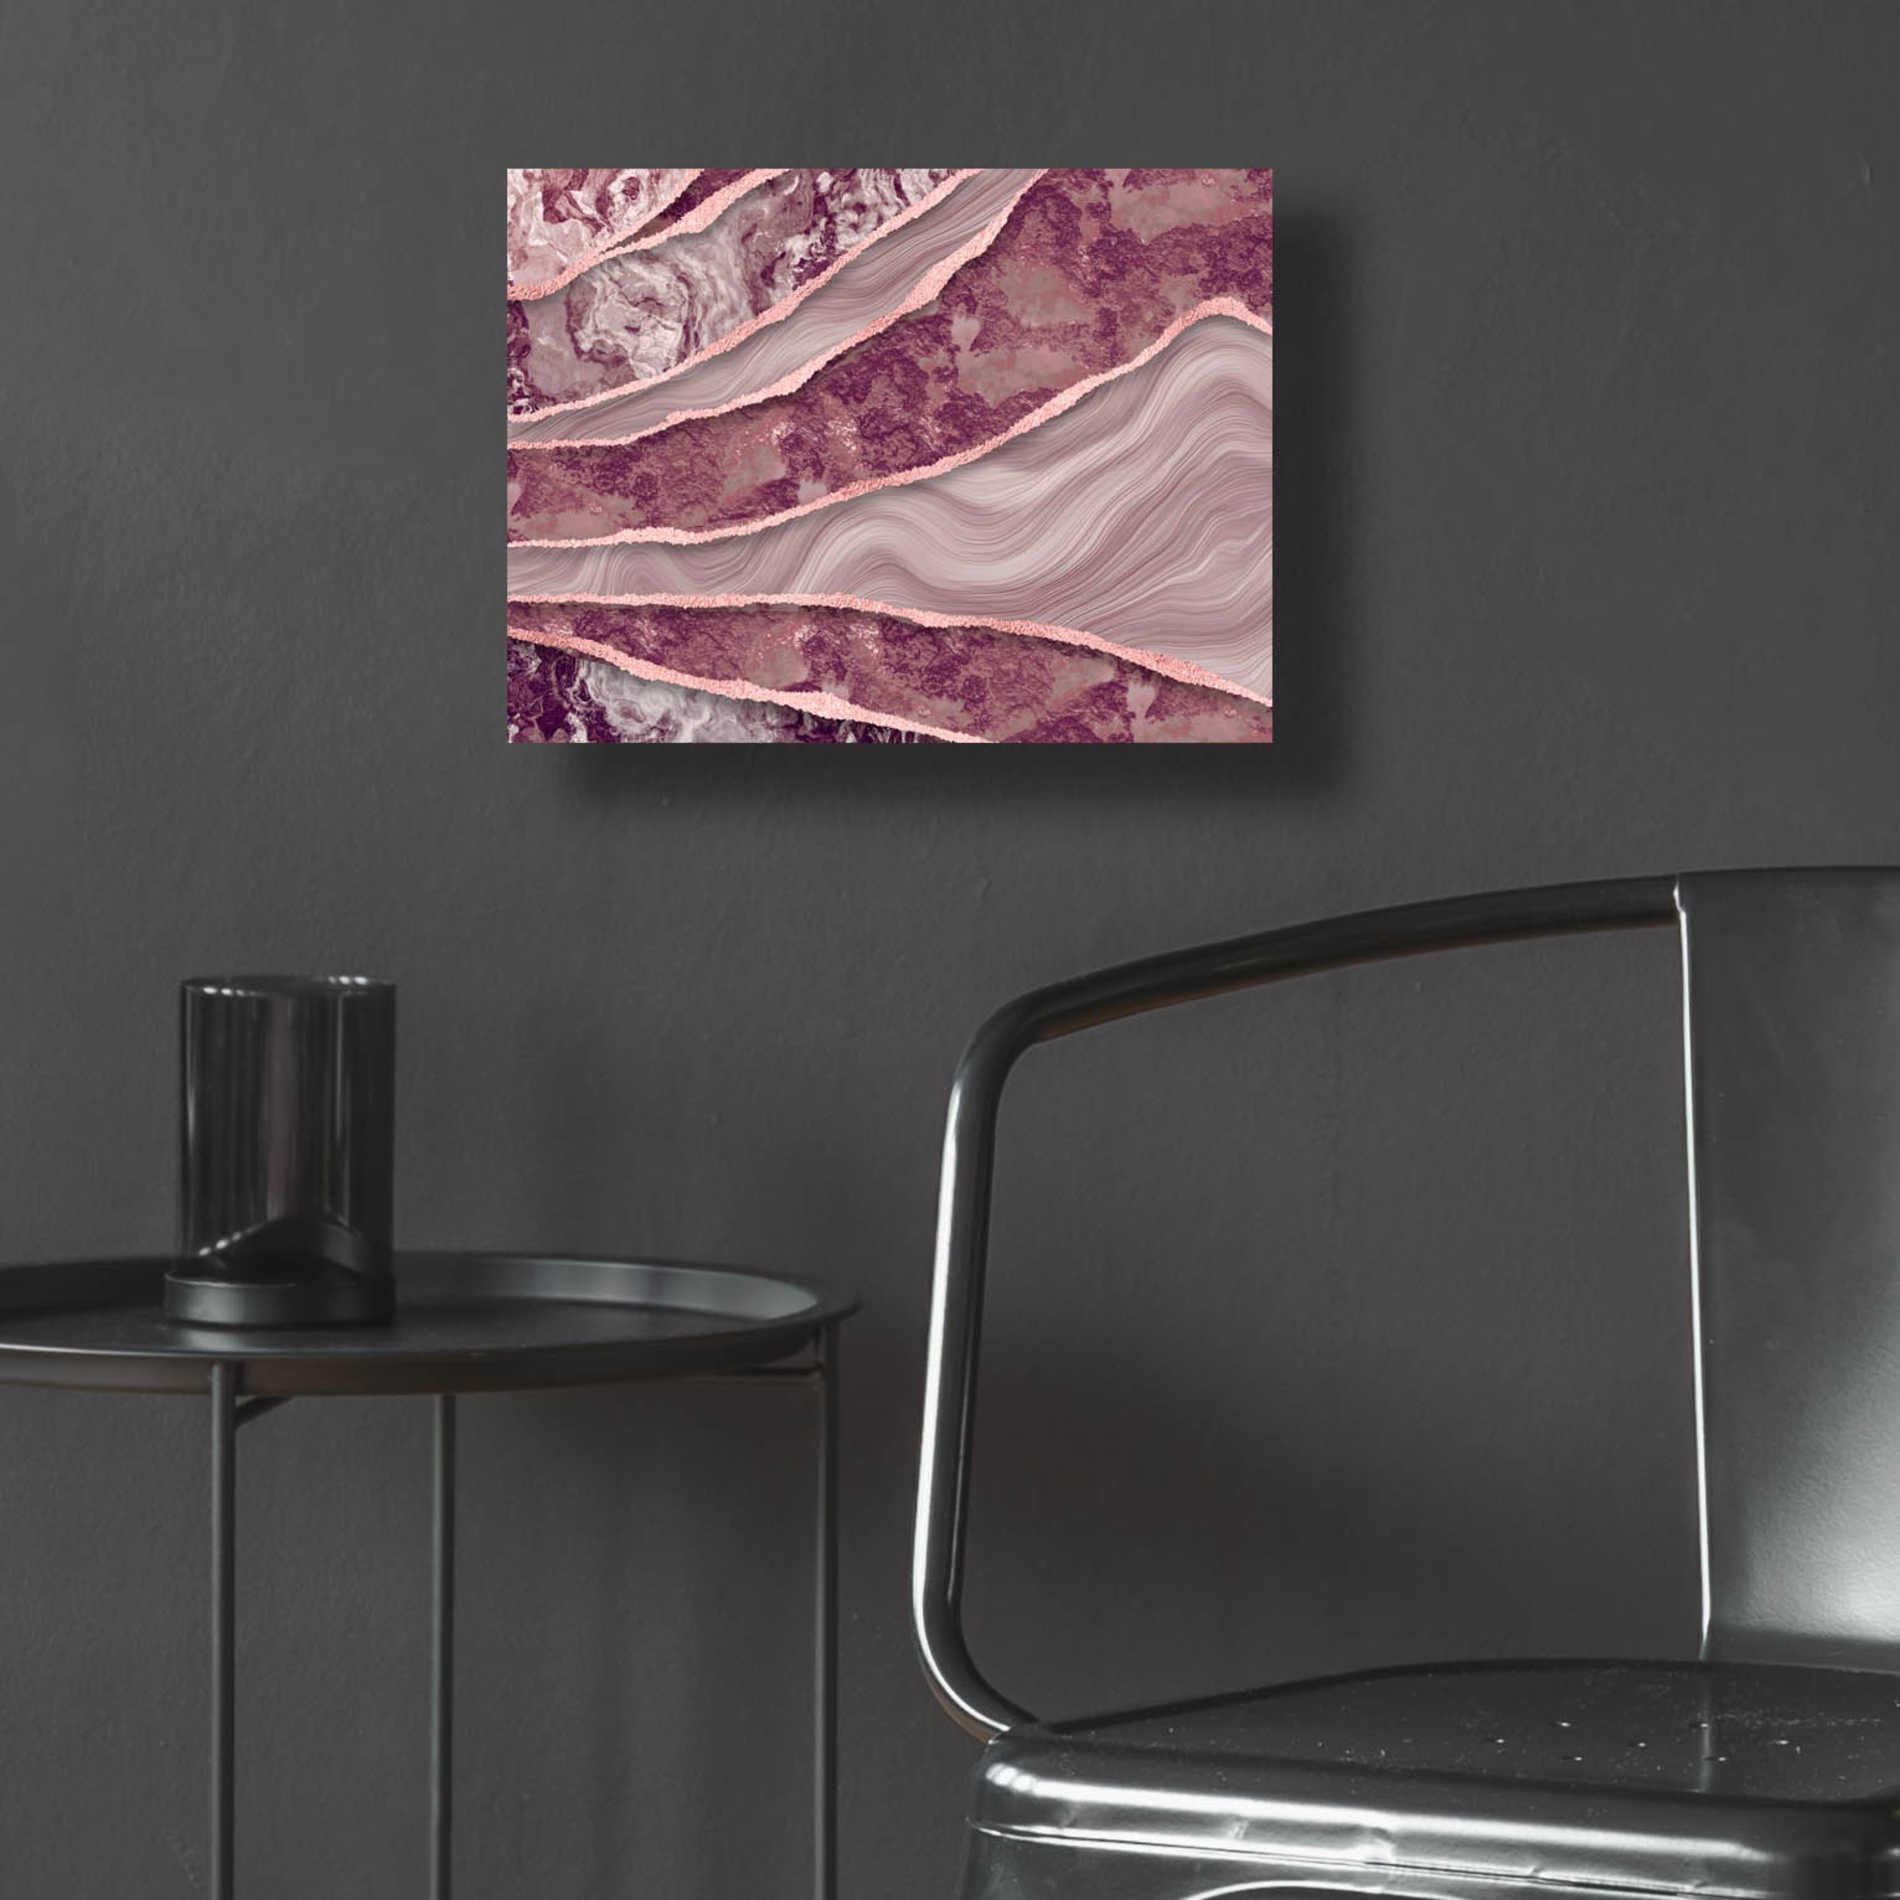 Epic Art 'Rose Quartz Marble And Stone' by Andrea Haase Acrylic Glass Wall Art,16x12